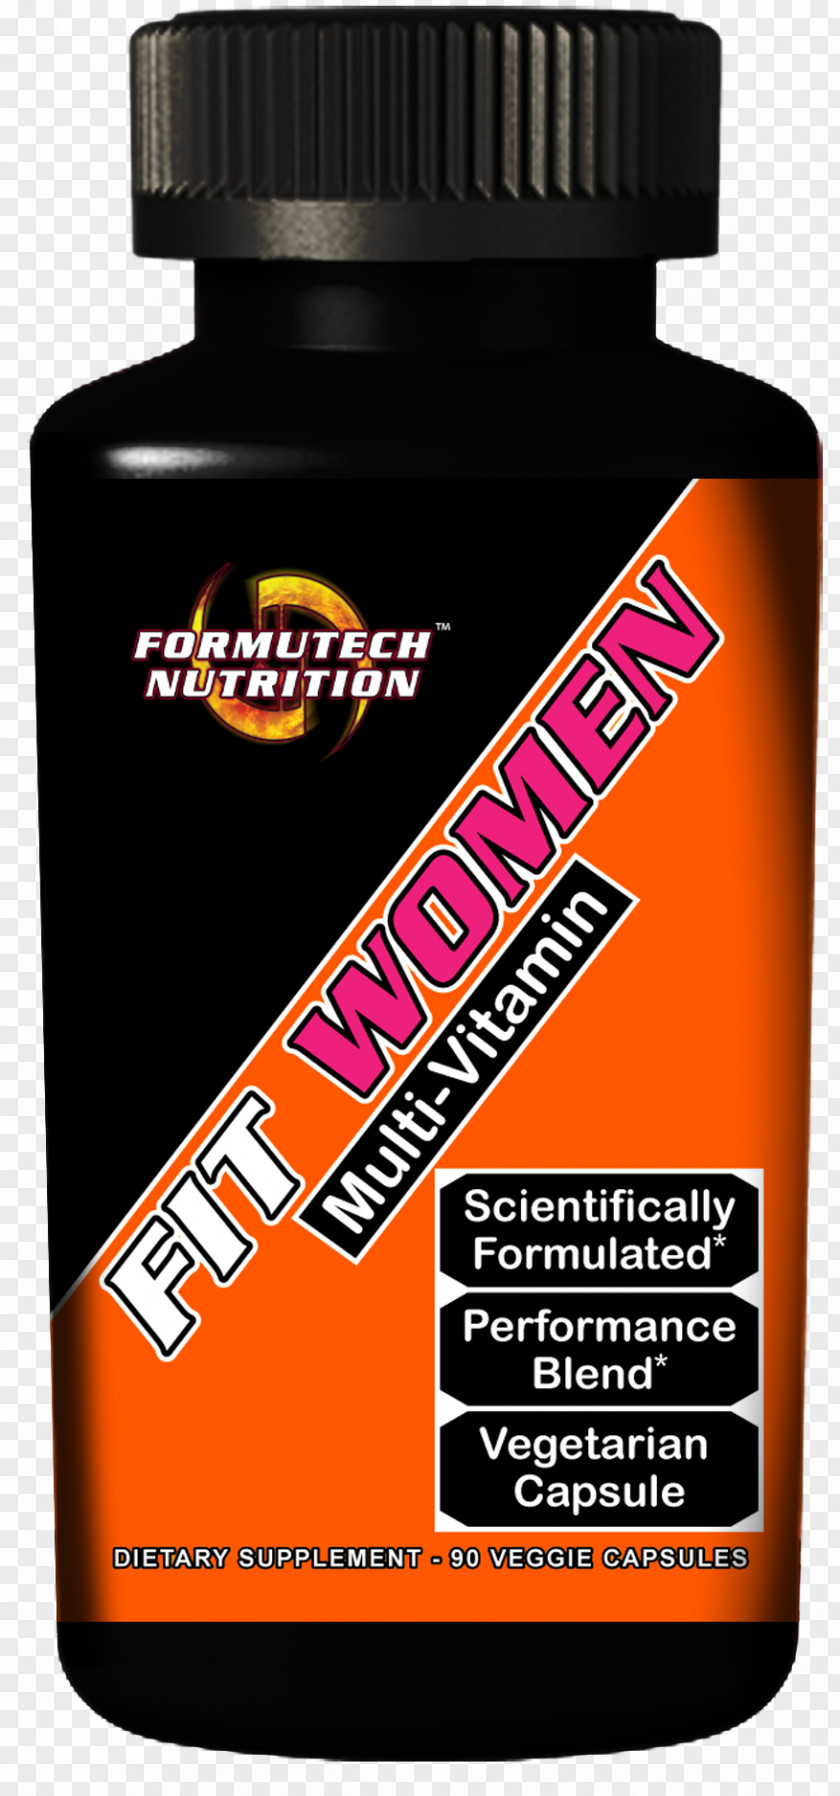 Bodybuilding Woman Dietary Supplement Levocarnitine Tablet Capsule Nutrition PNG